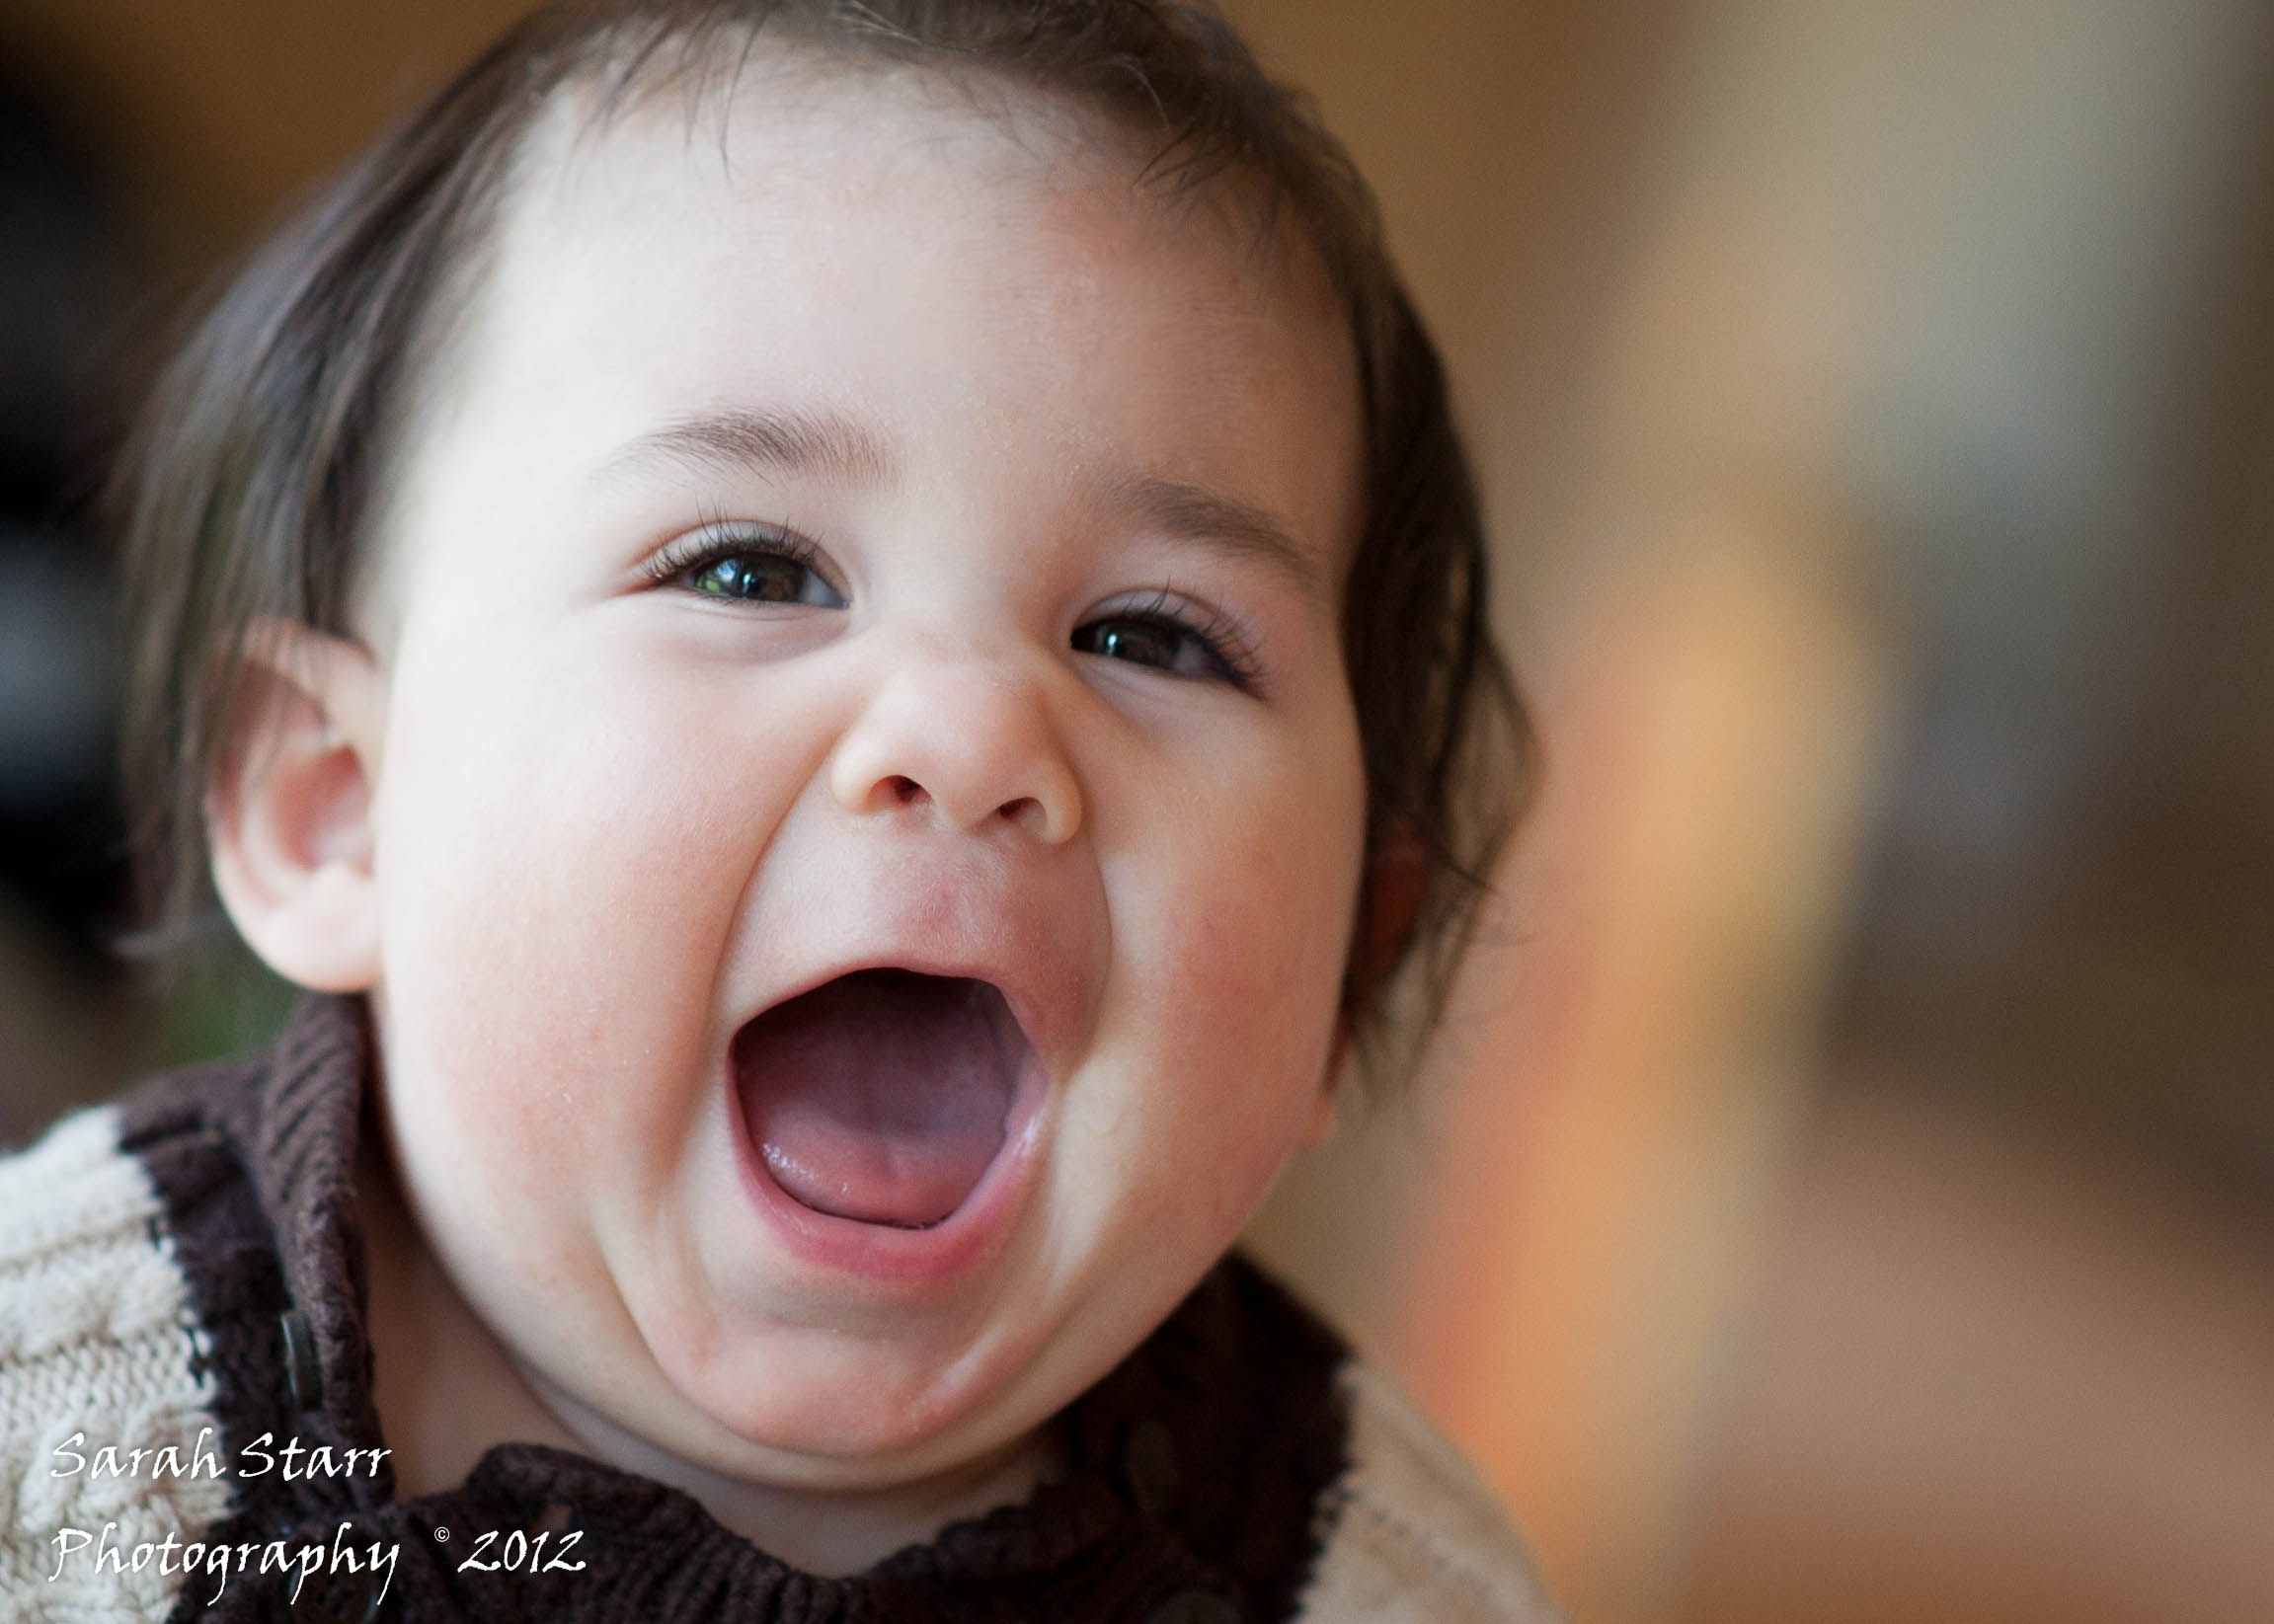 Download this Happy Baby Almost Months Roar Laughing picture